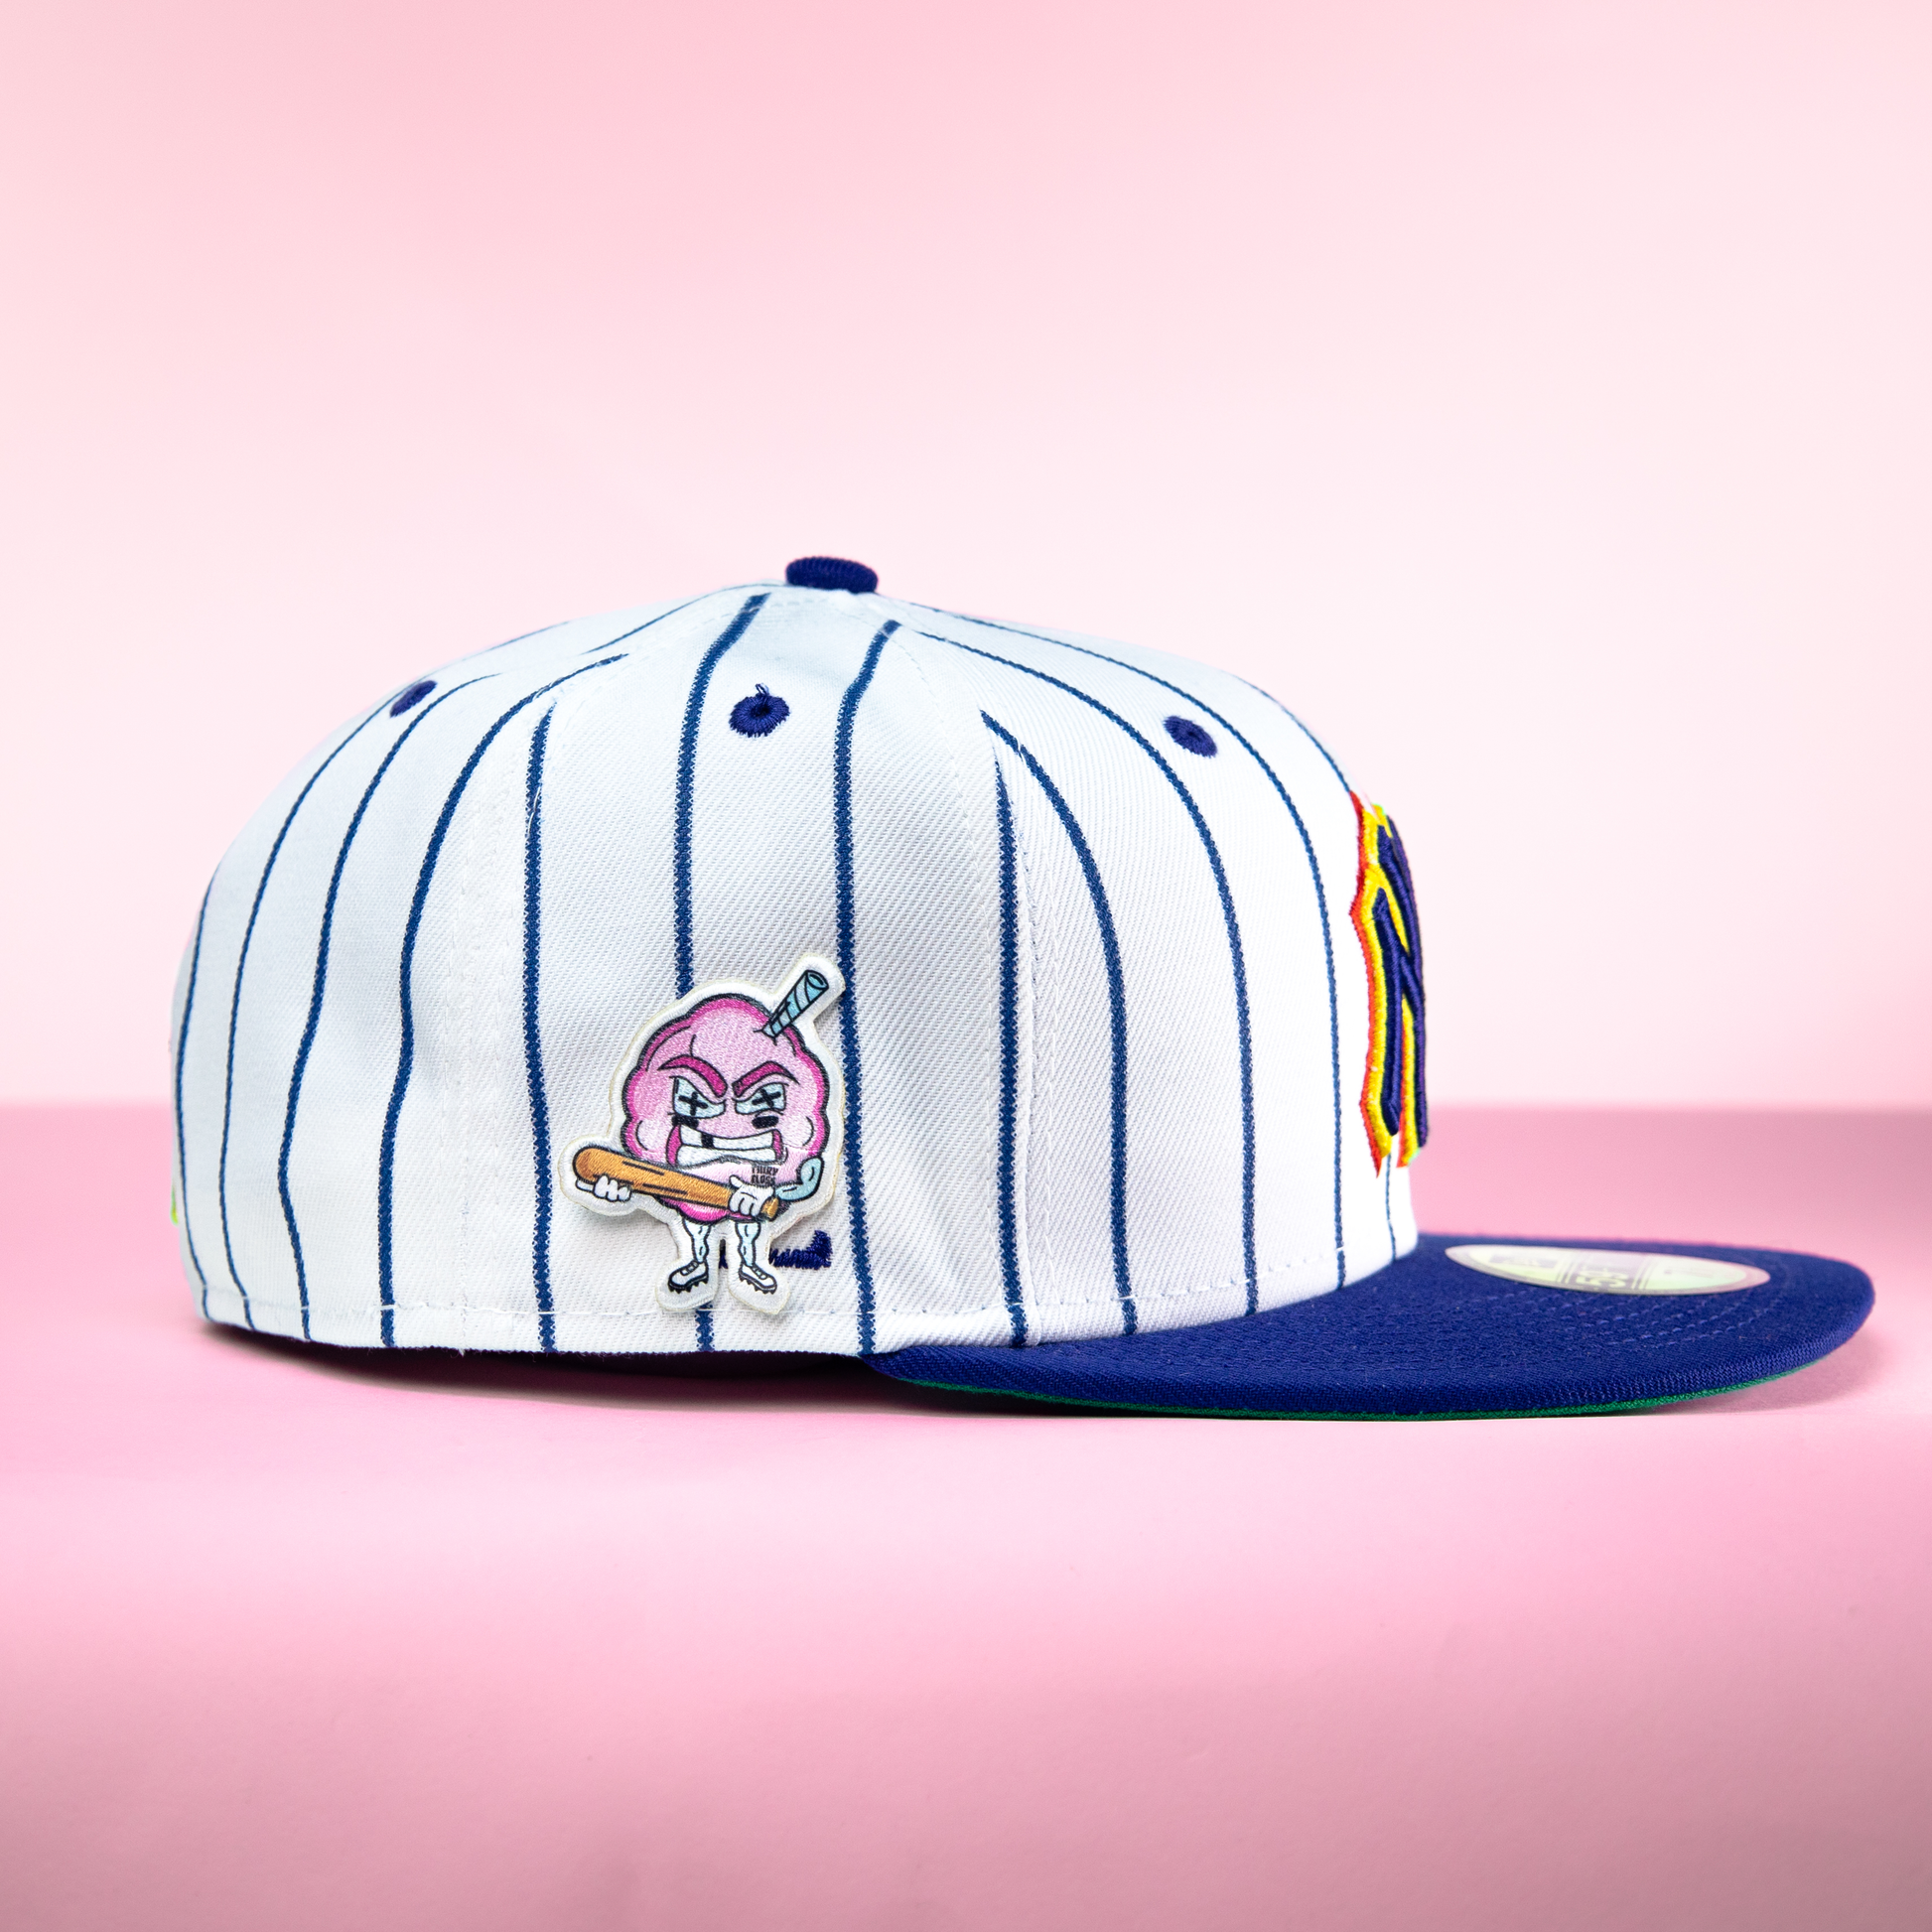 Cotton Candy Bubblegum Hat Patch Baseball Flavor Embroidered Iron On